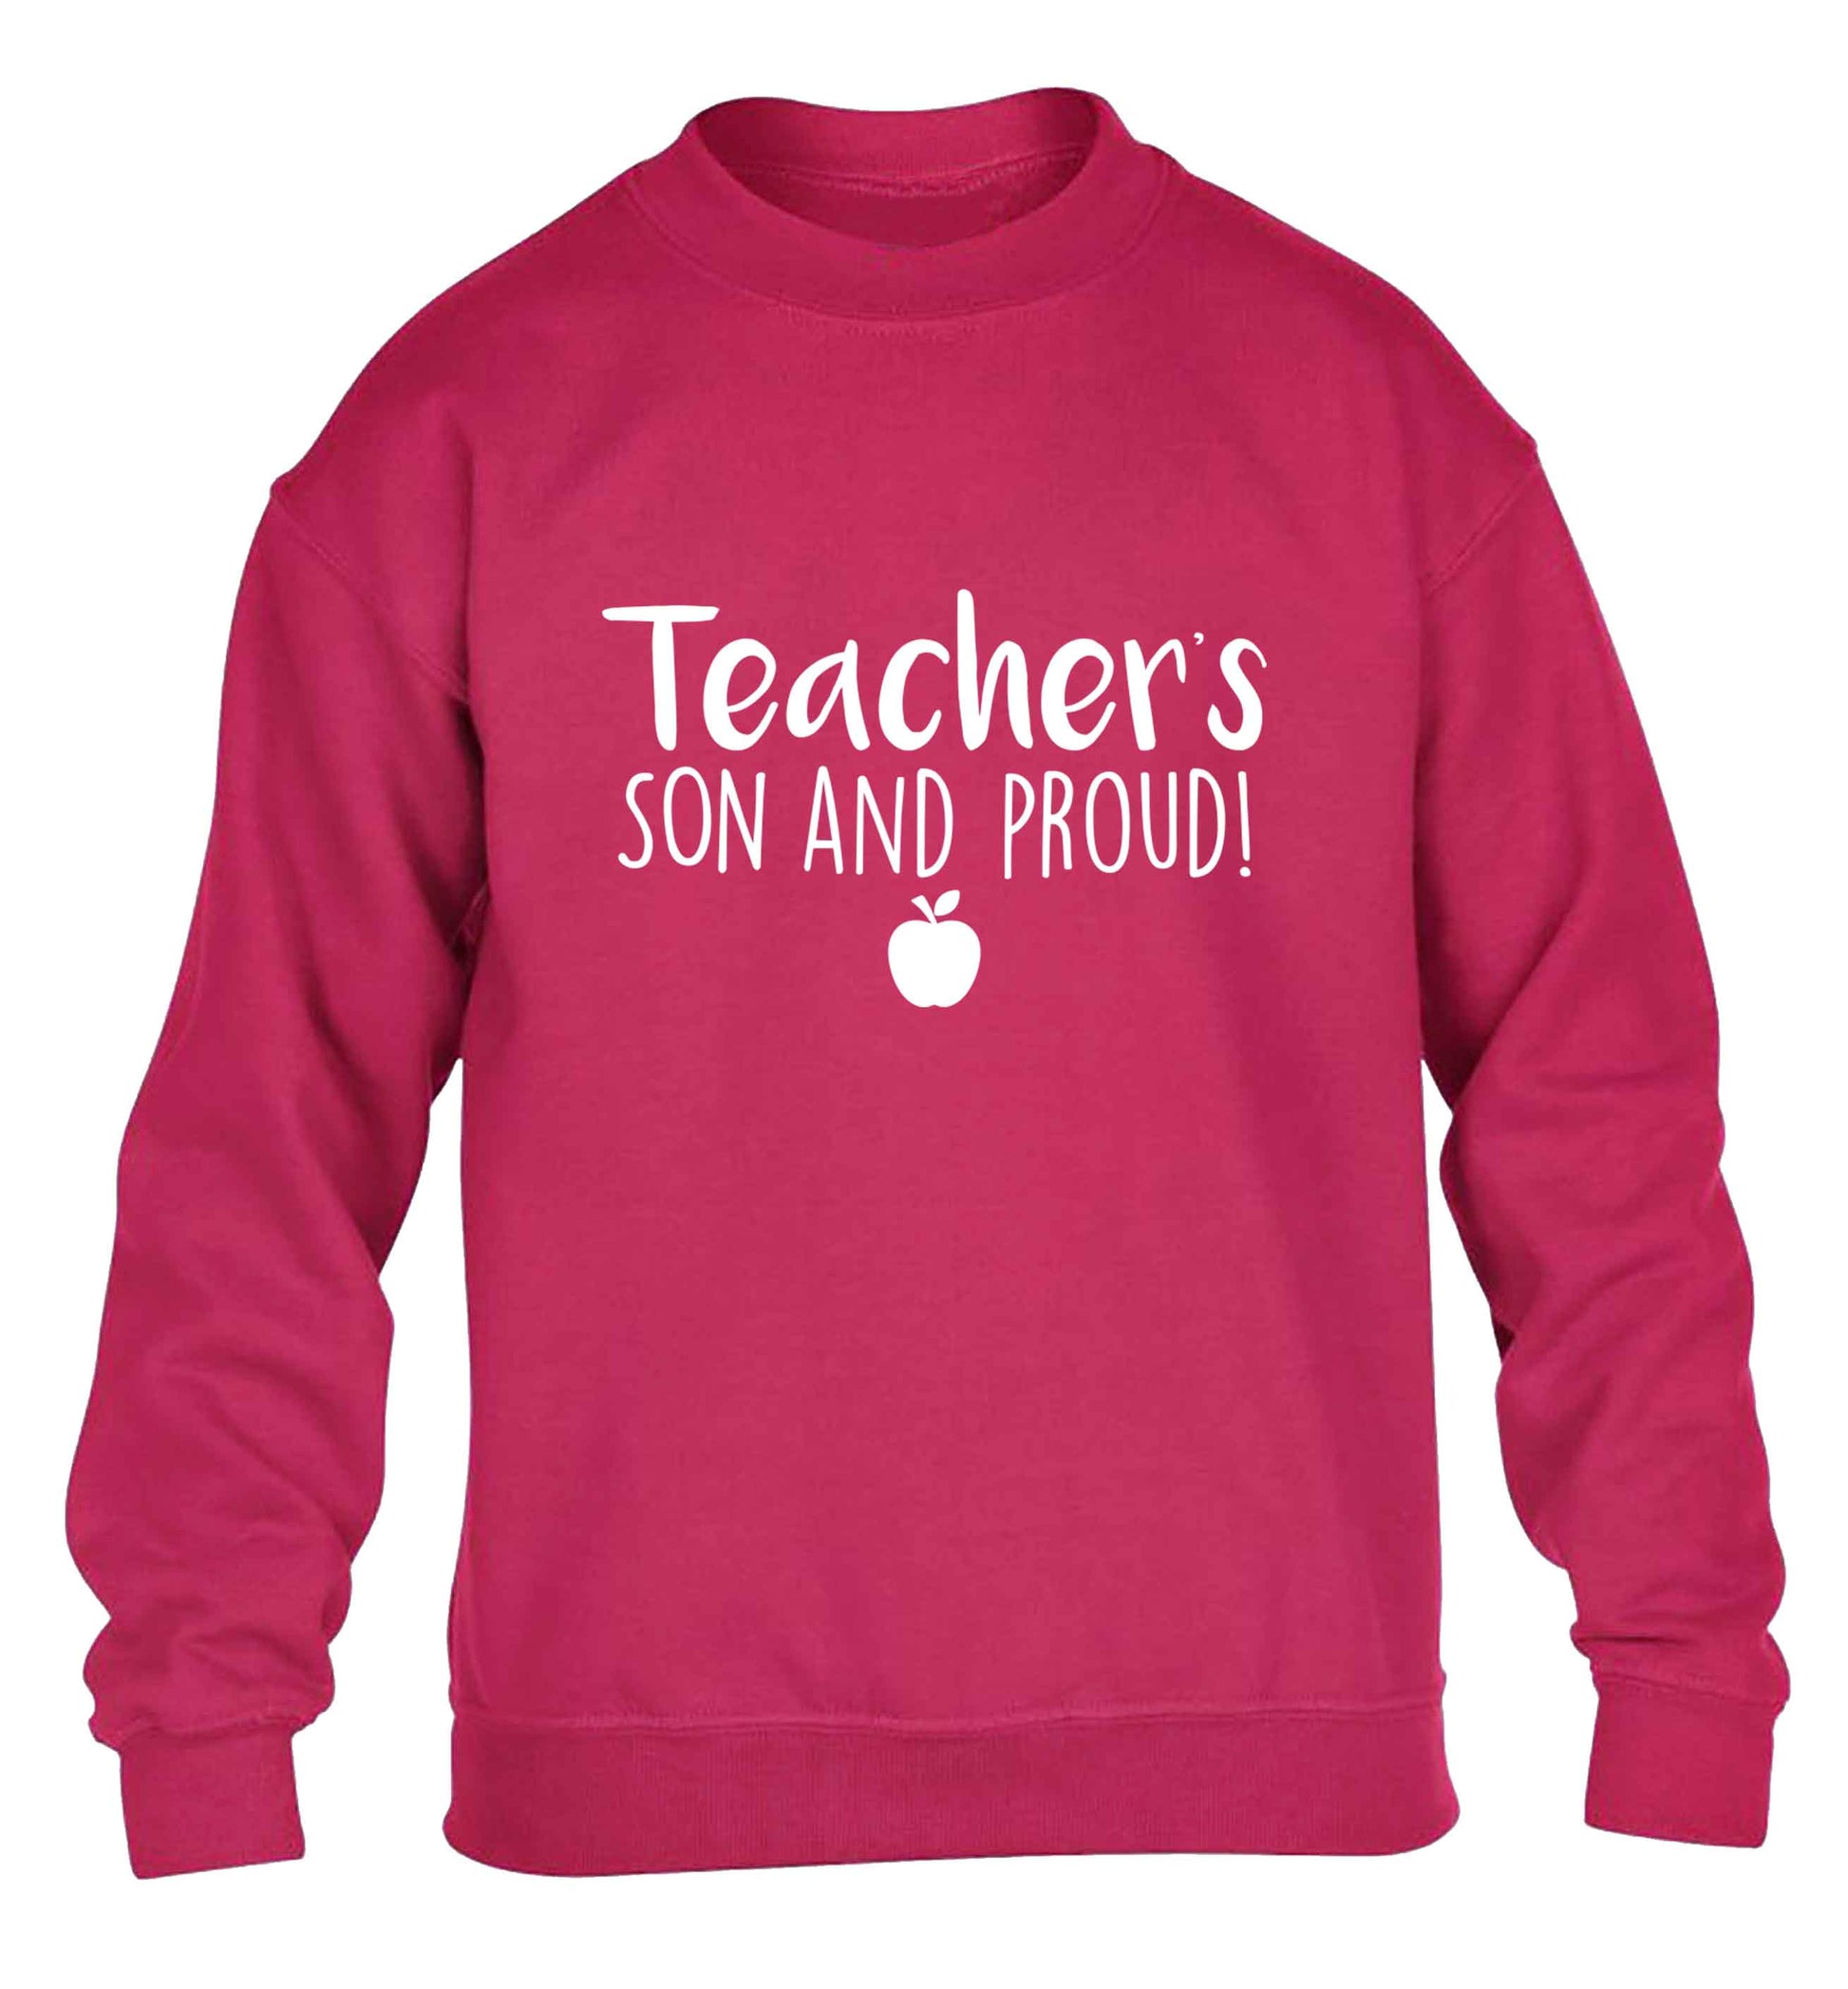 Teachers son and proud children's pink sweater 12-13 Years